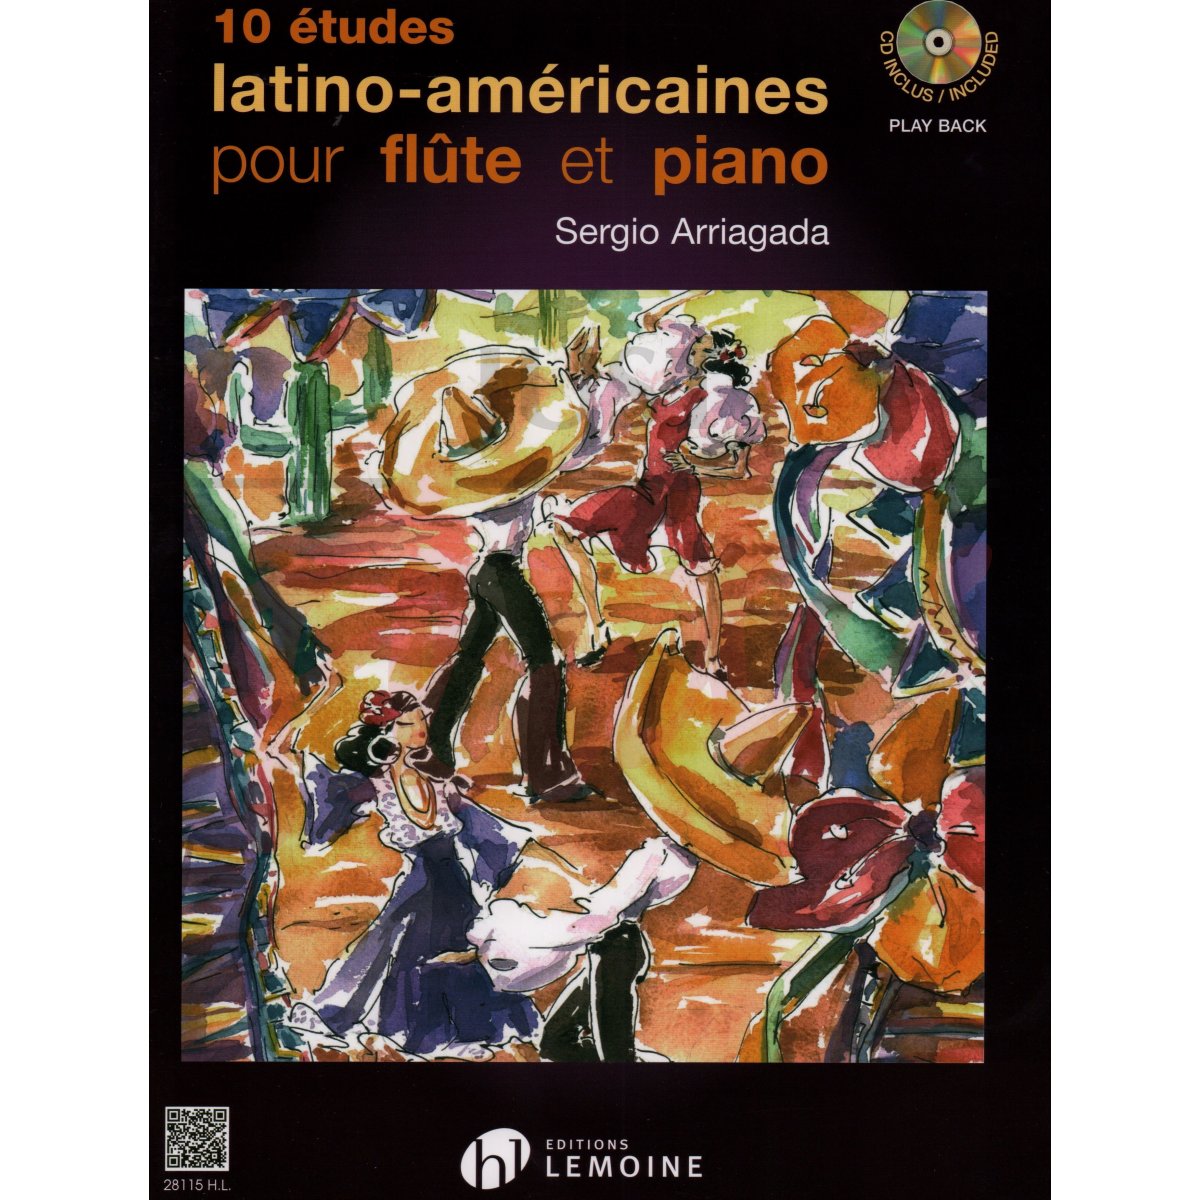 Ten Latin-American Studies for Flute and Piano